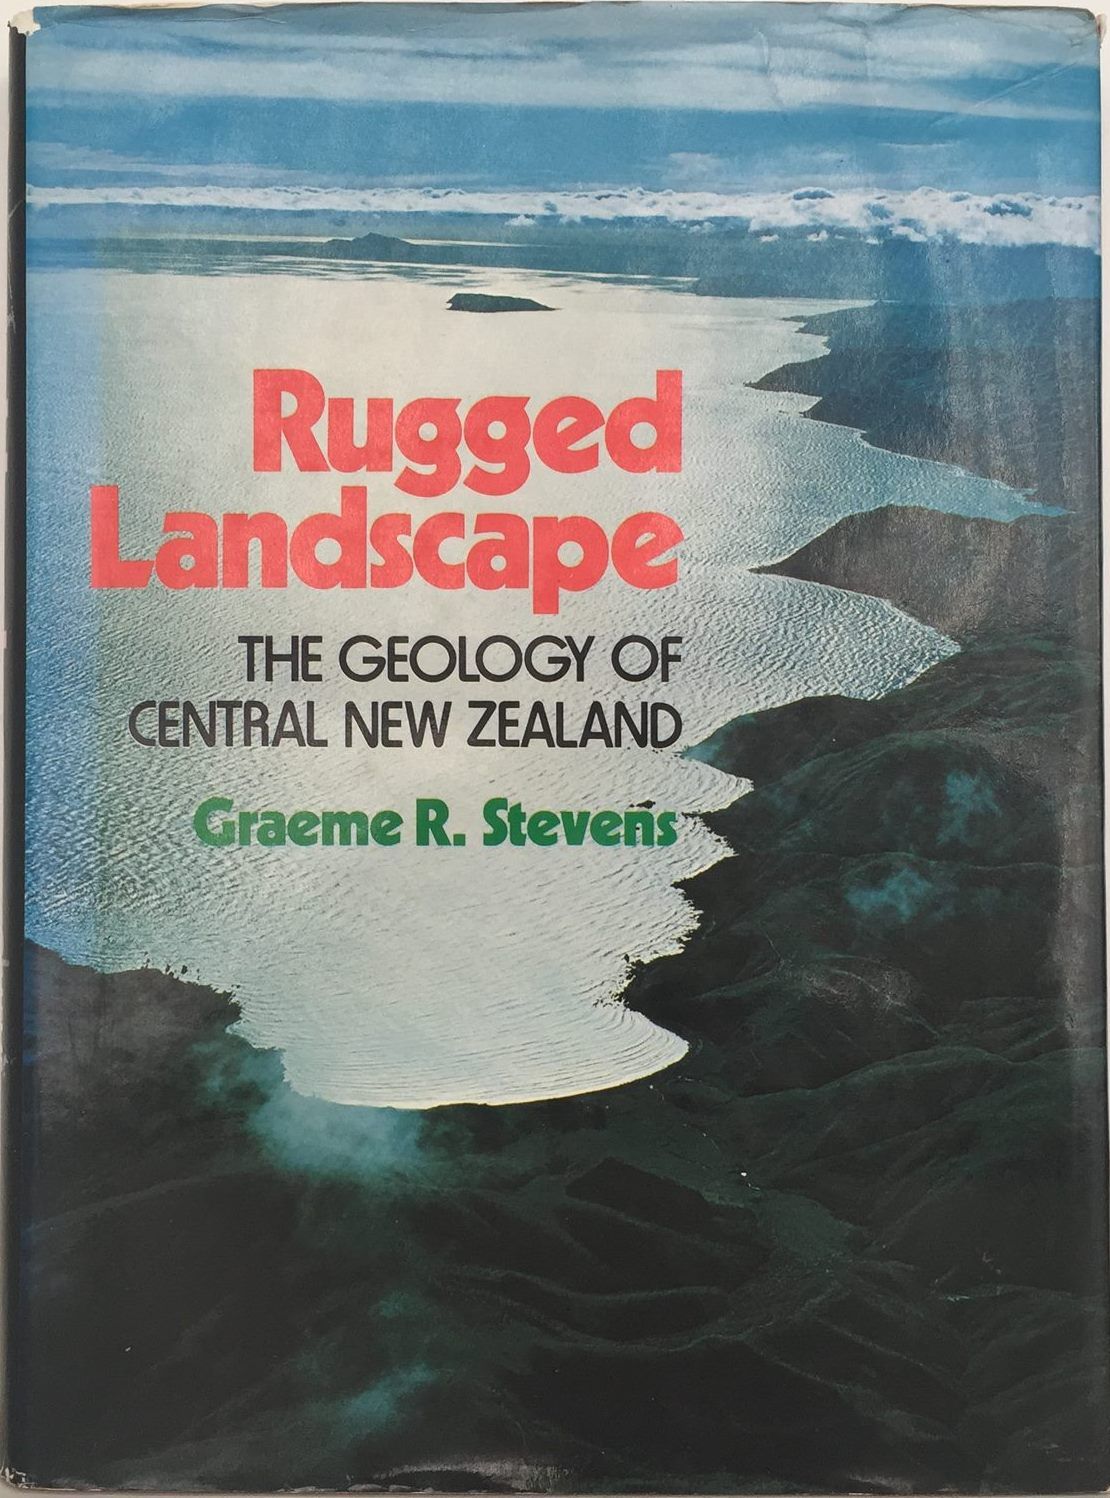 RUGGED LANDSCAPE: The Geology of Central New Zealand